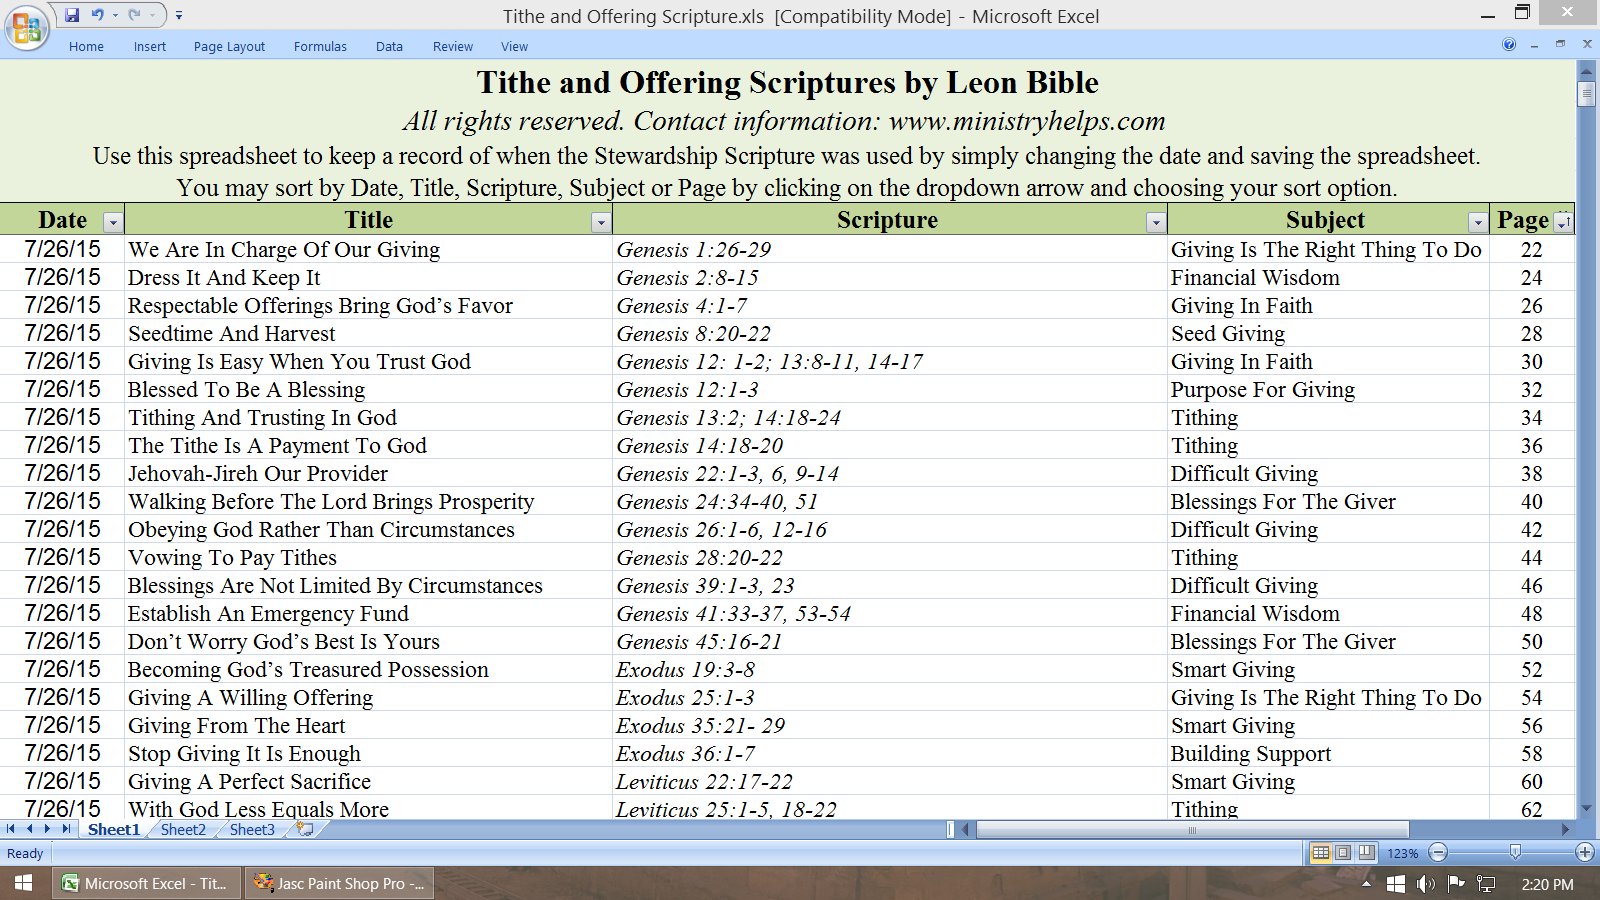 Tithe and Offering Scriptures Excel Spreadsheet